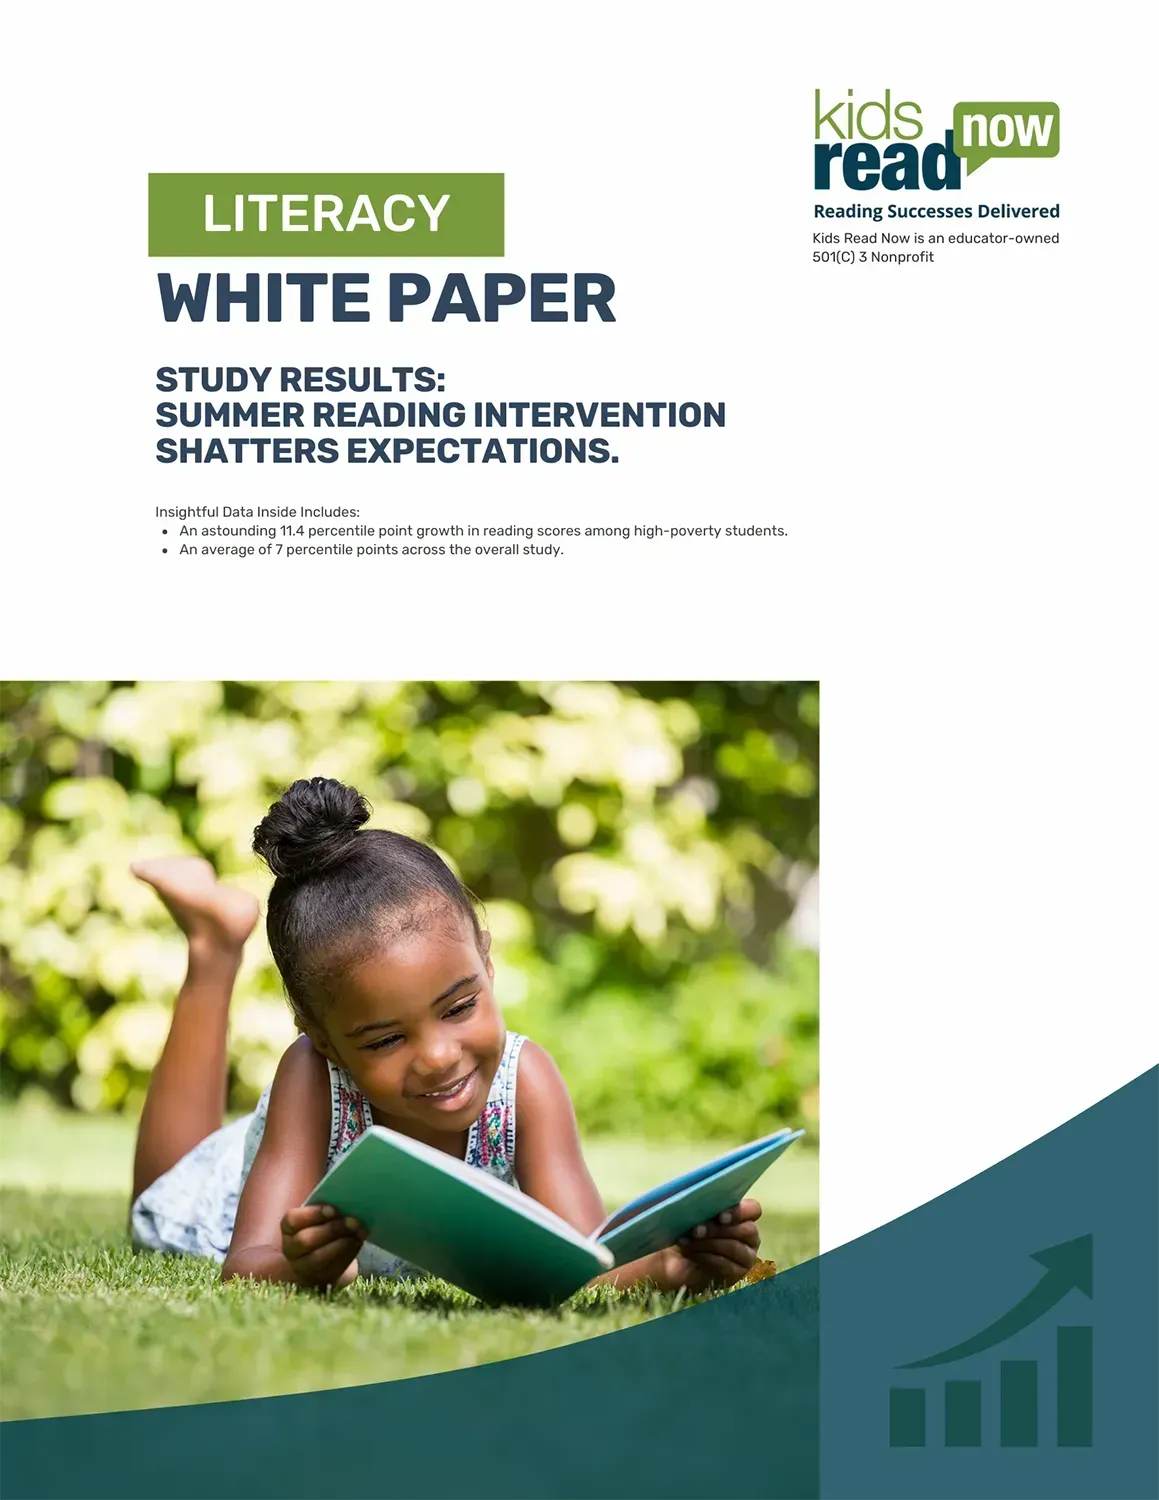 White Paper Study:  The Summer Reading Intervention That Shatters Expectations